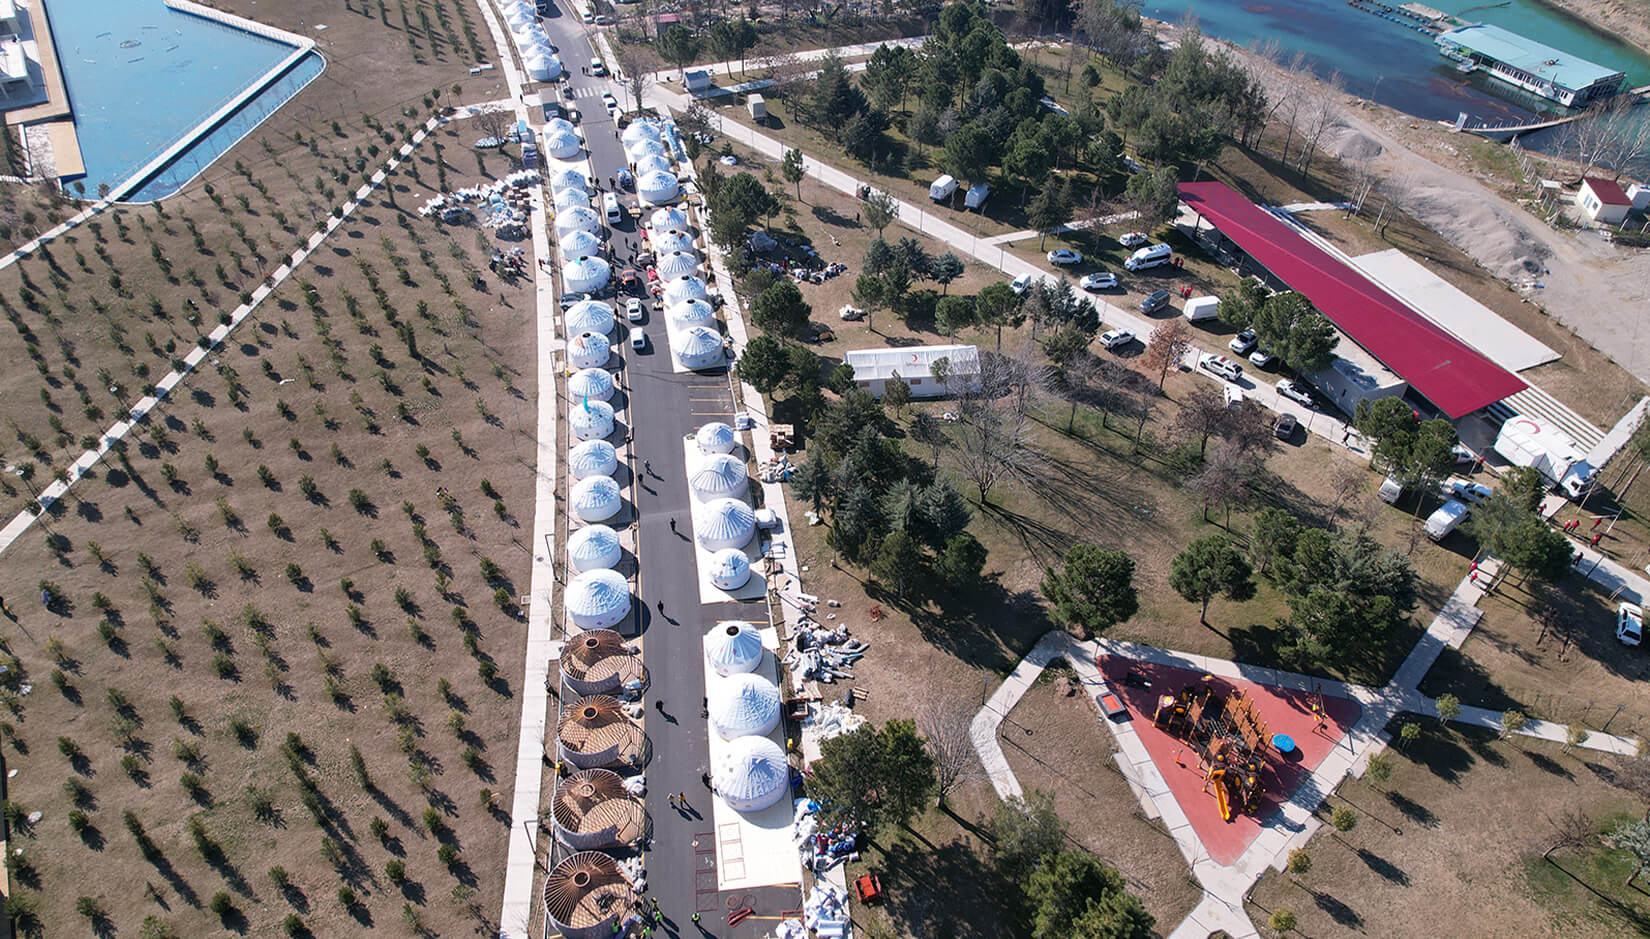 The Solidarity Oba (Tent Village) Is Being Established in the Earthquake Region